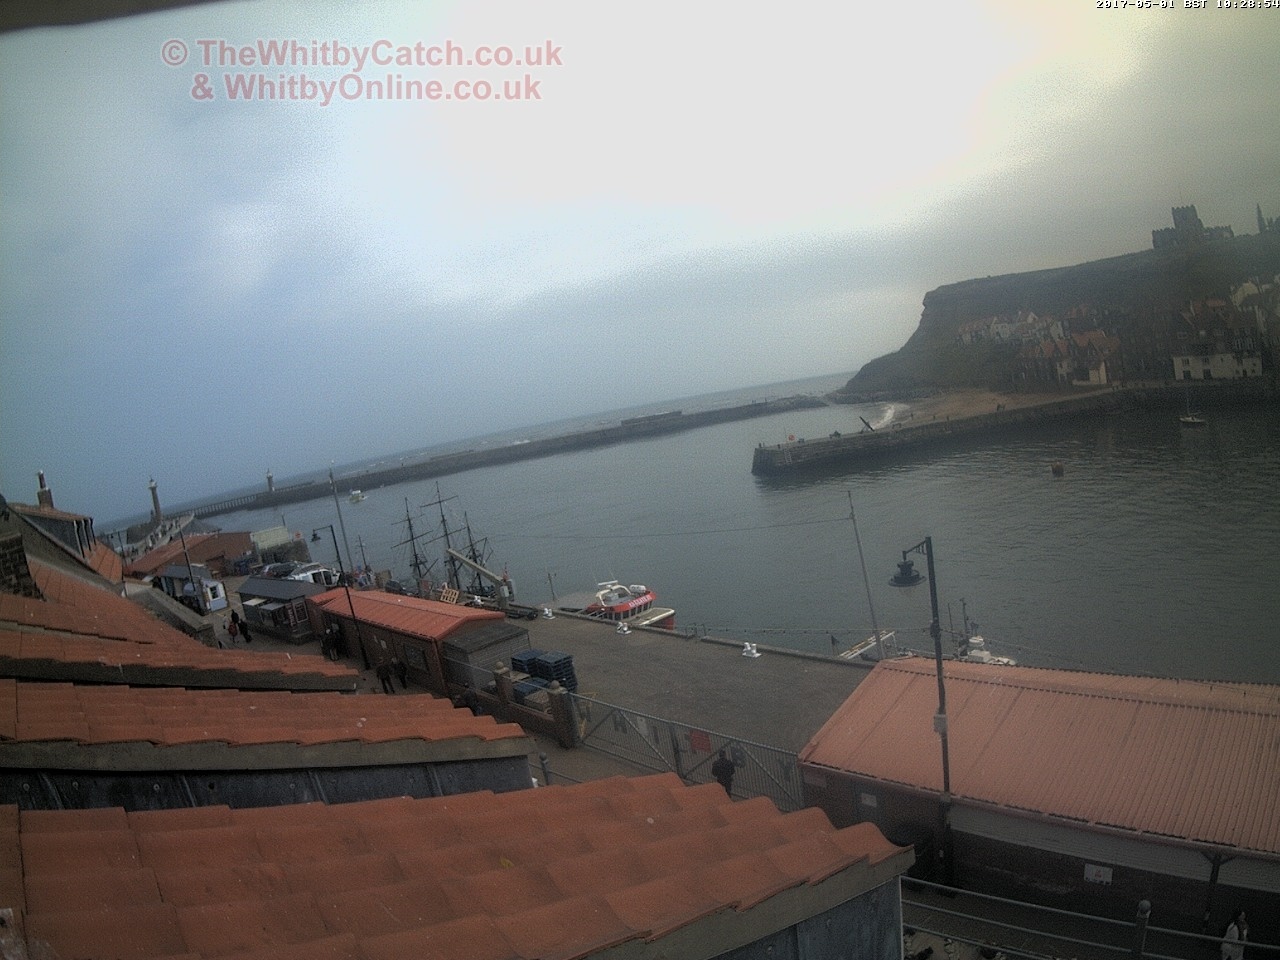 Whitby Mon 1st May 2017 10:29.